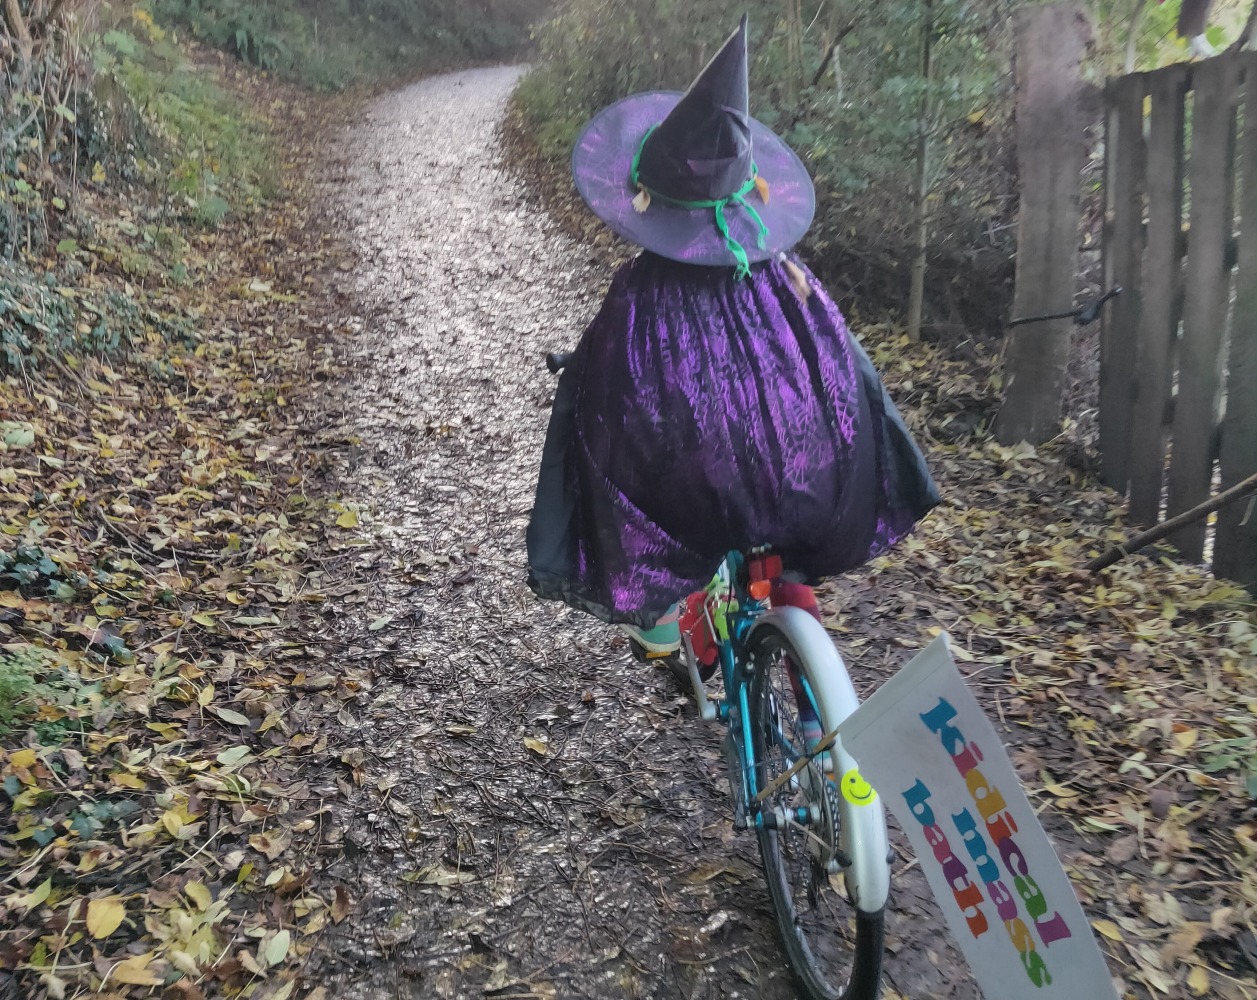 Halloween Costumes for Cycling Kids: A young girl pictured from behind riding a bike in a witch costume.